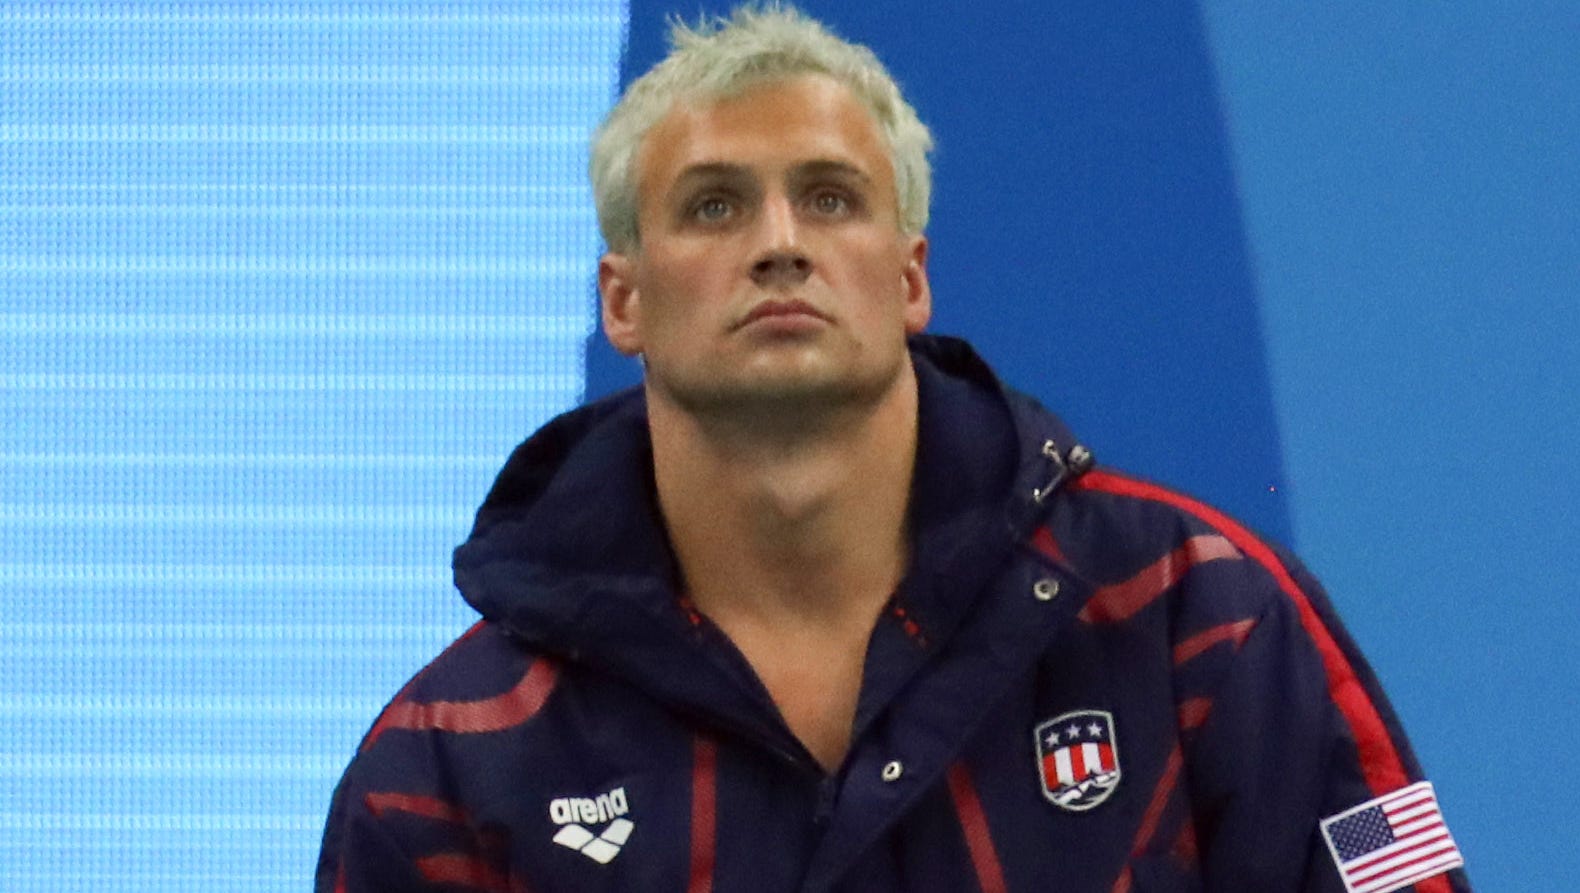 Olympic Swimmer Ryan Lochte Suspended For 10 Months And World Championships